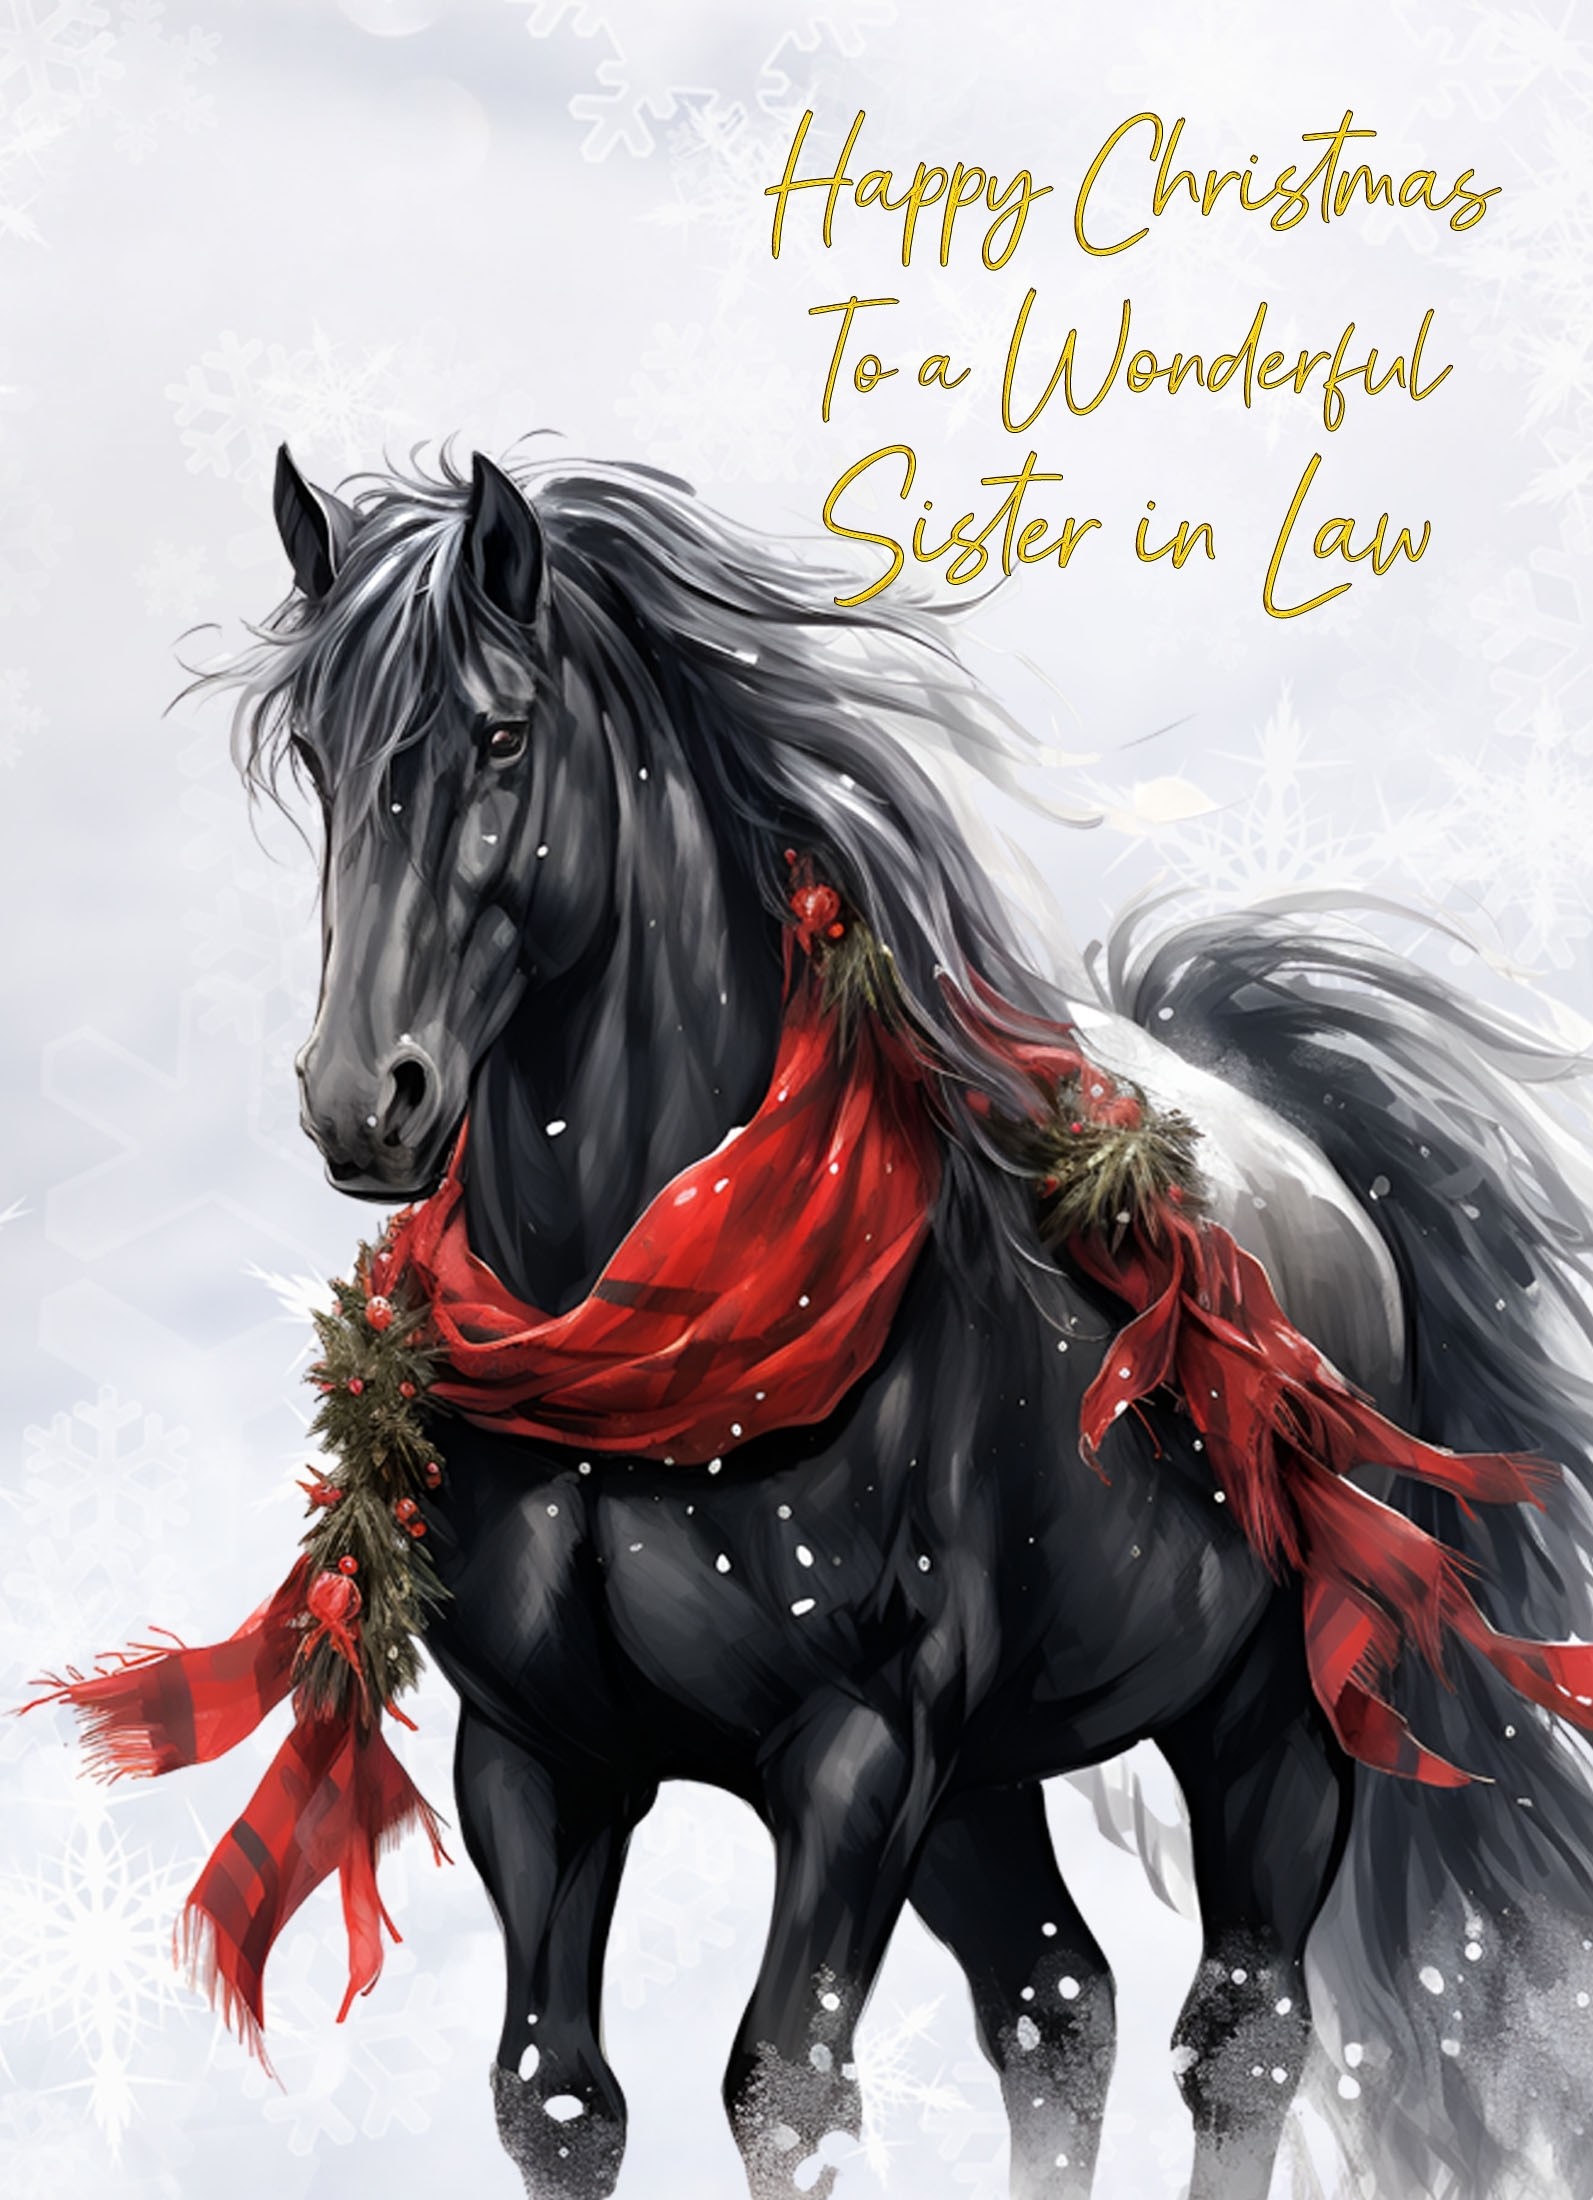 Christmas Card For Sister in Law (Horse Art Black)